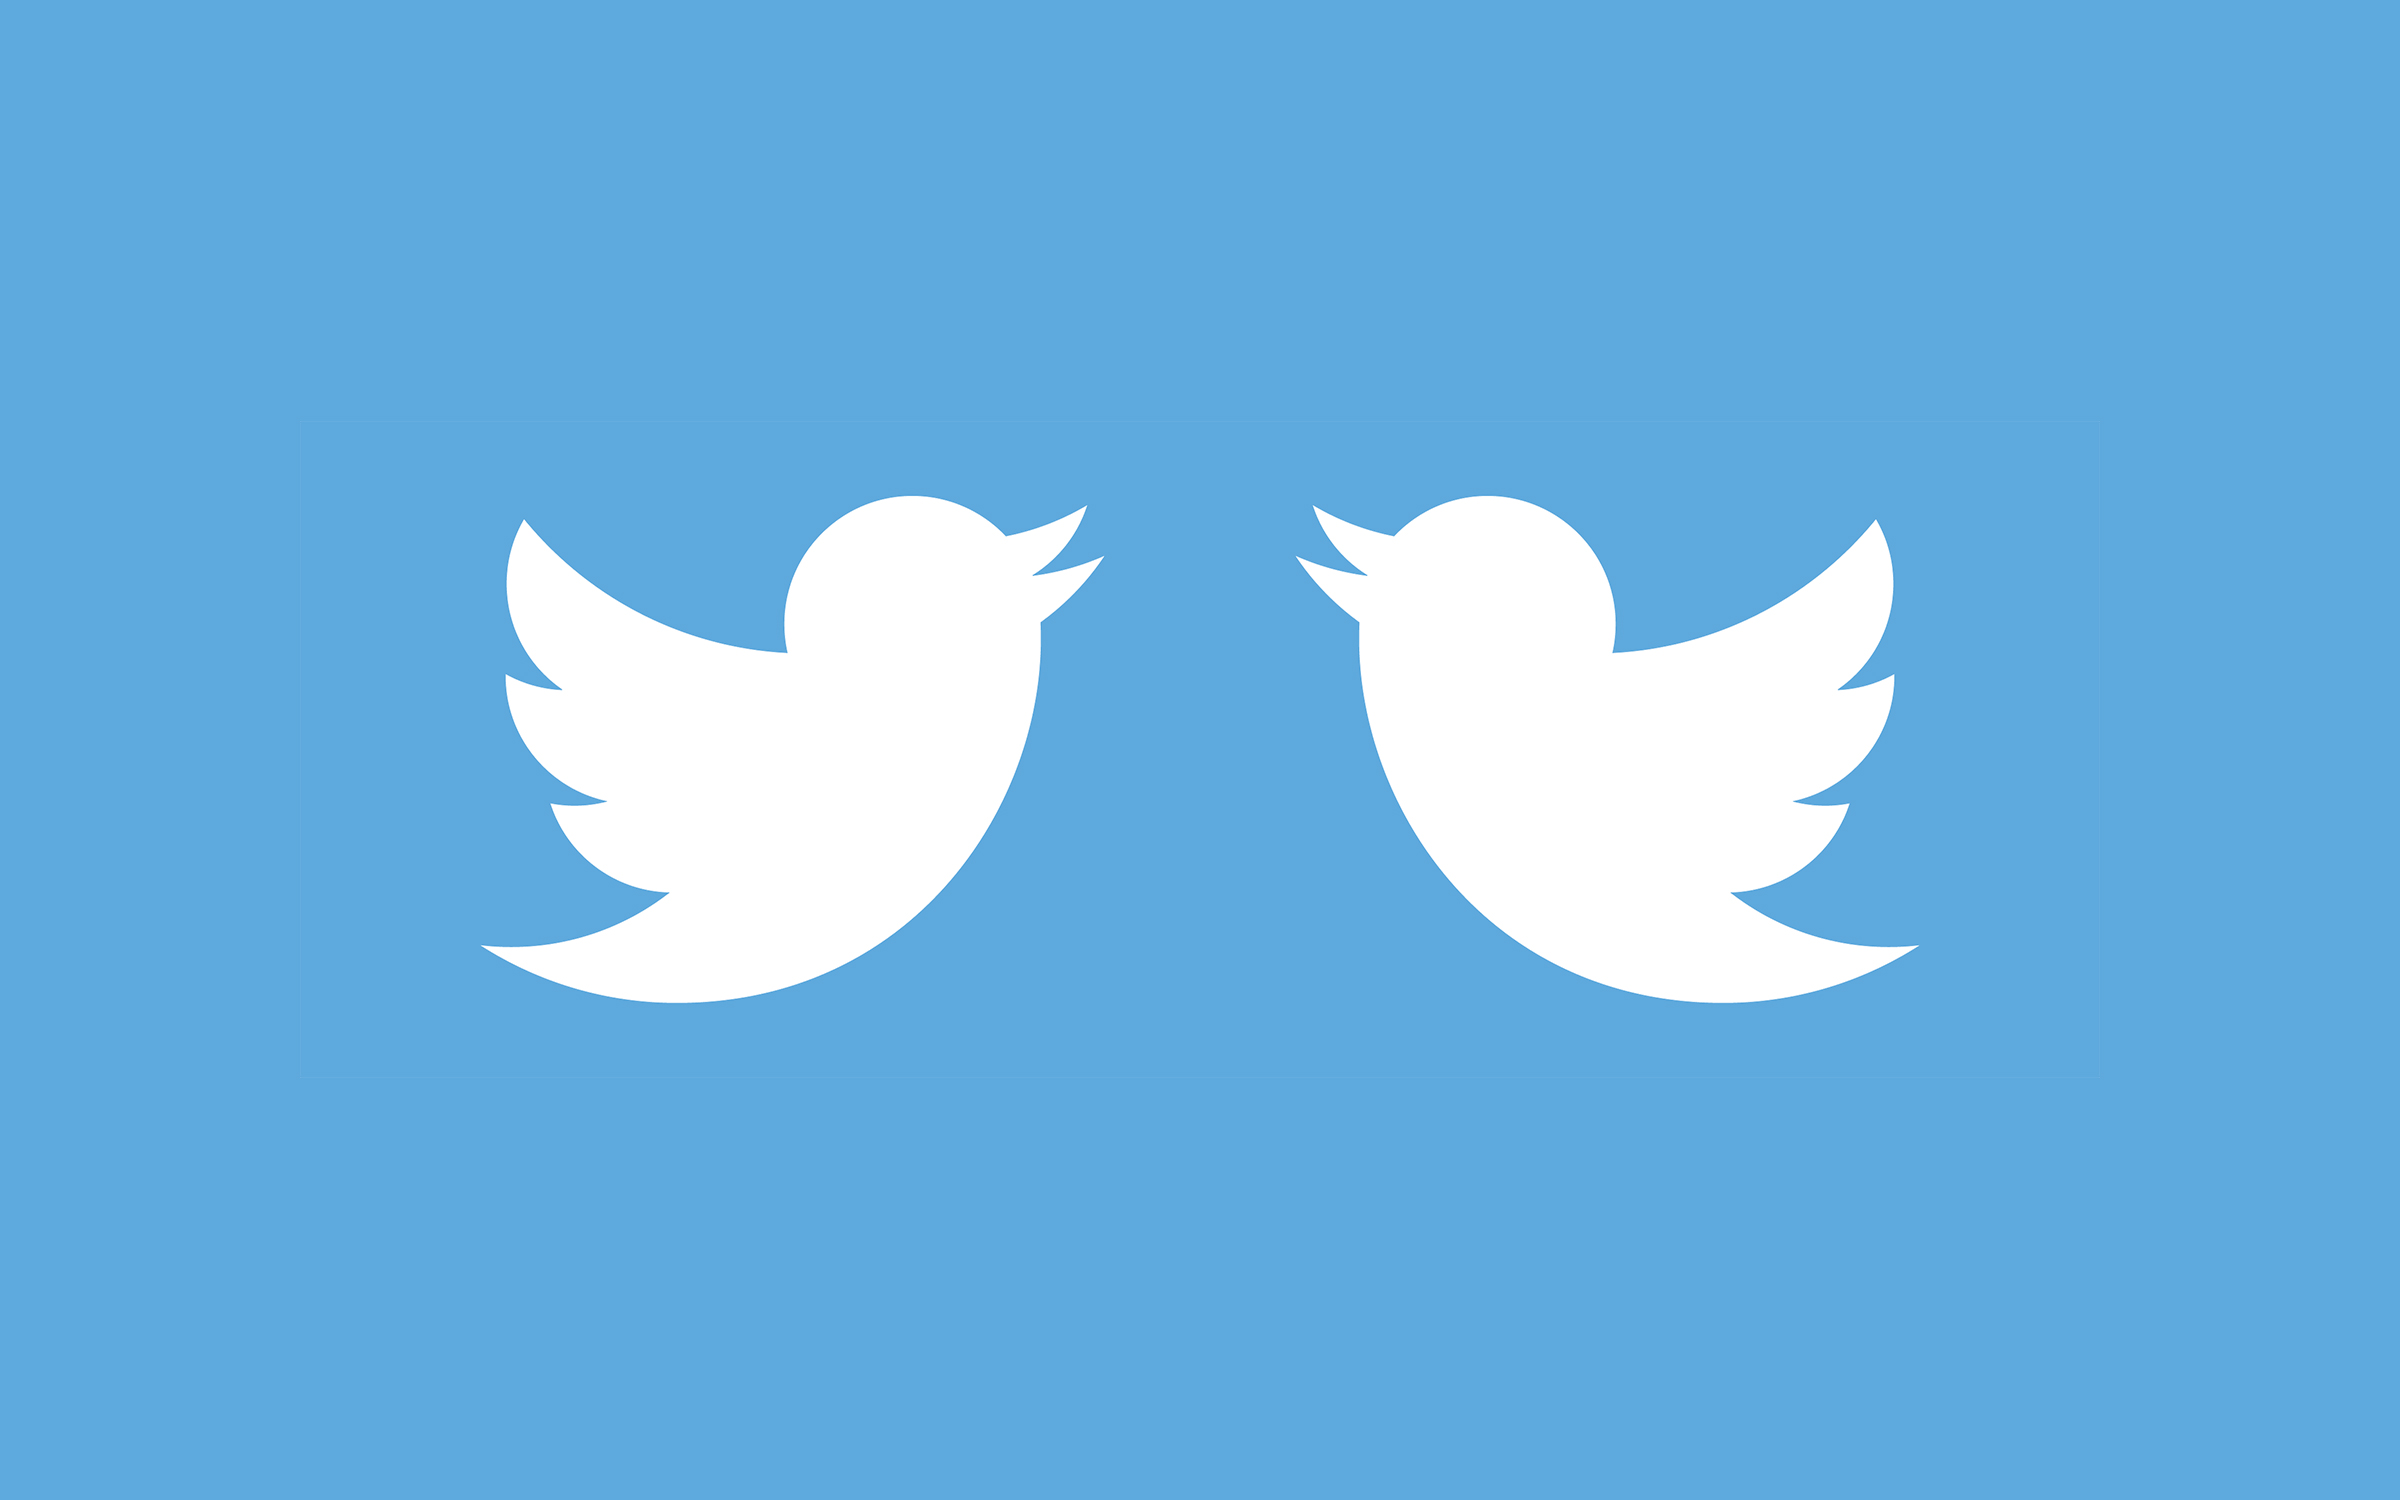 10 Tips for Boosting Your Twitter Presence and Credibility